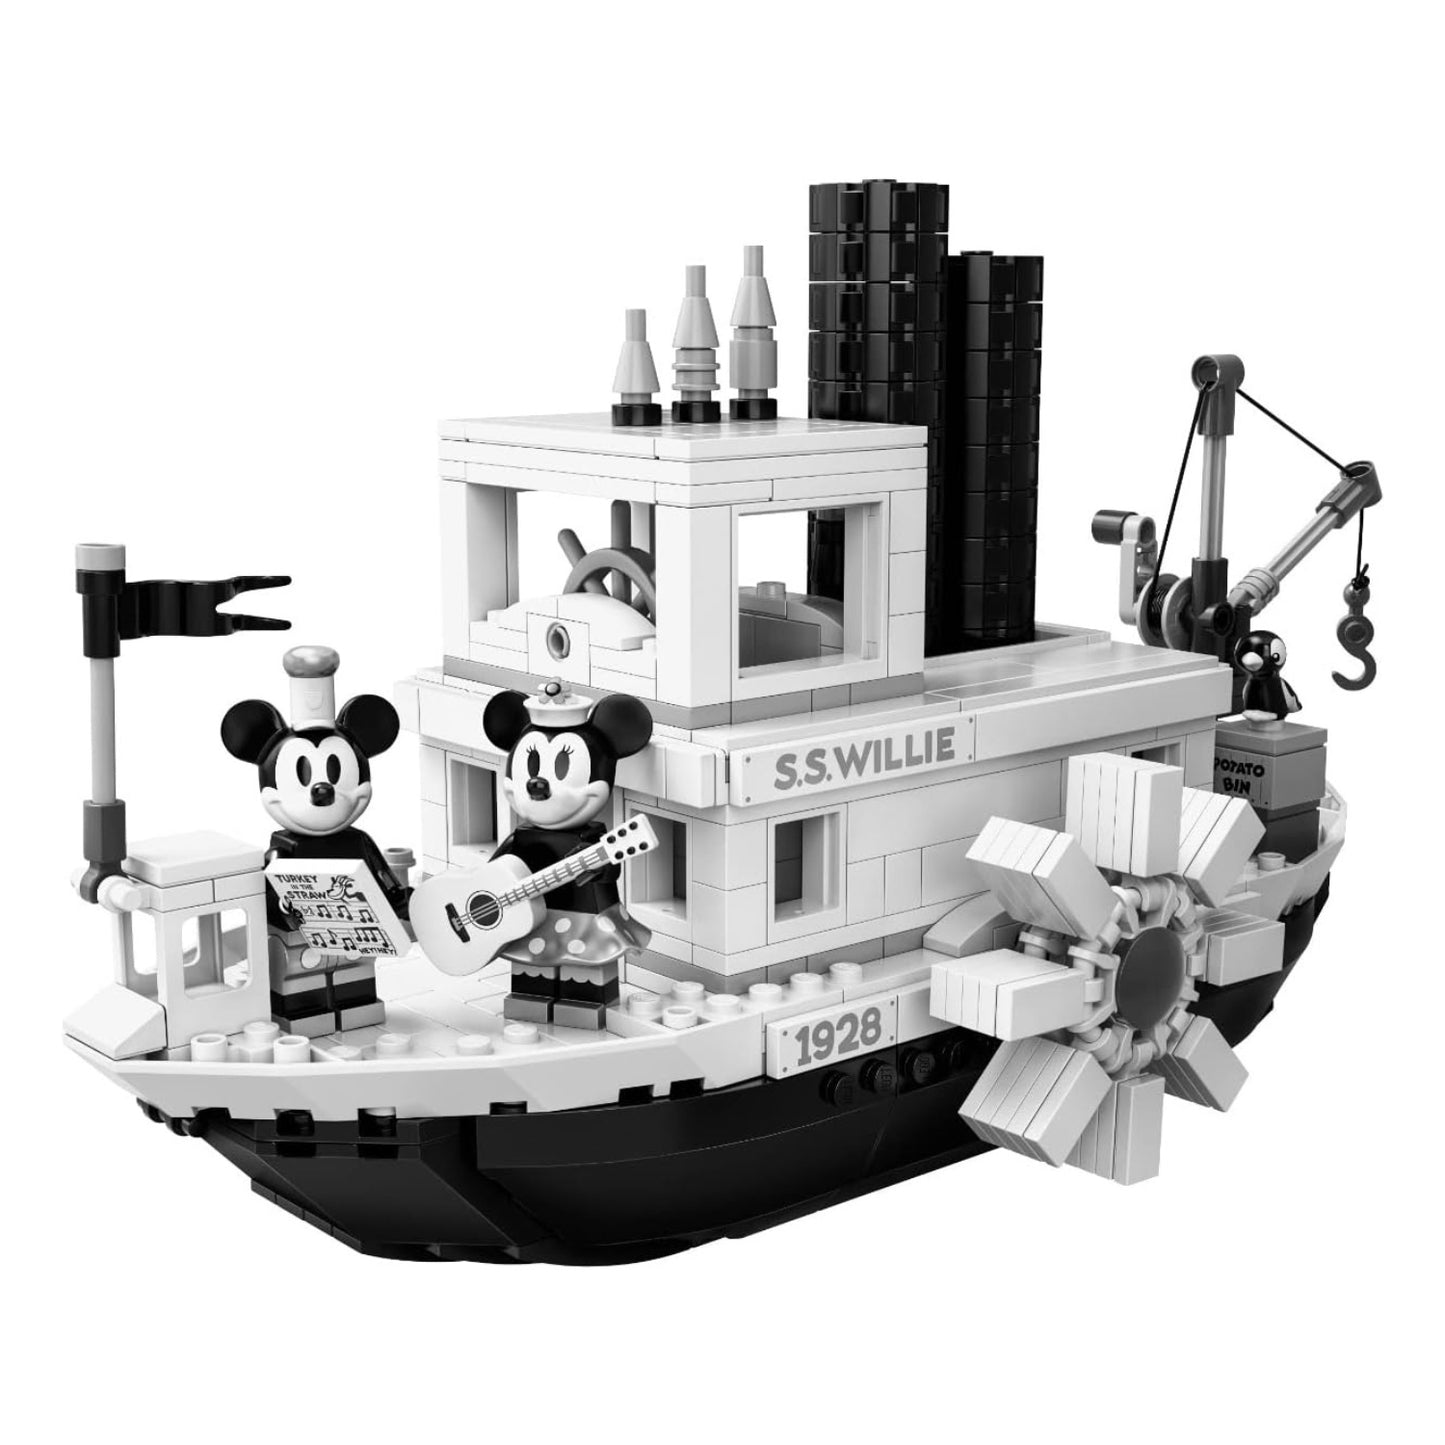 Mickey Mouse Ship Moudle Willy Puzzle Toy - Block Center 